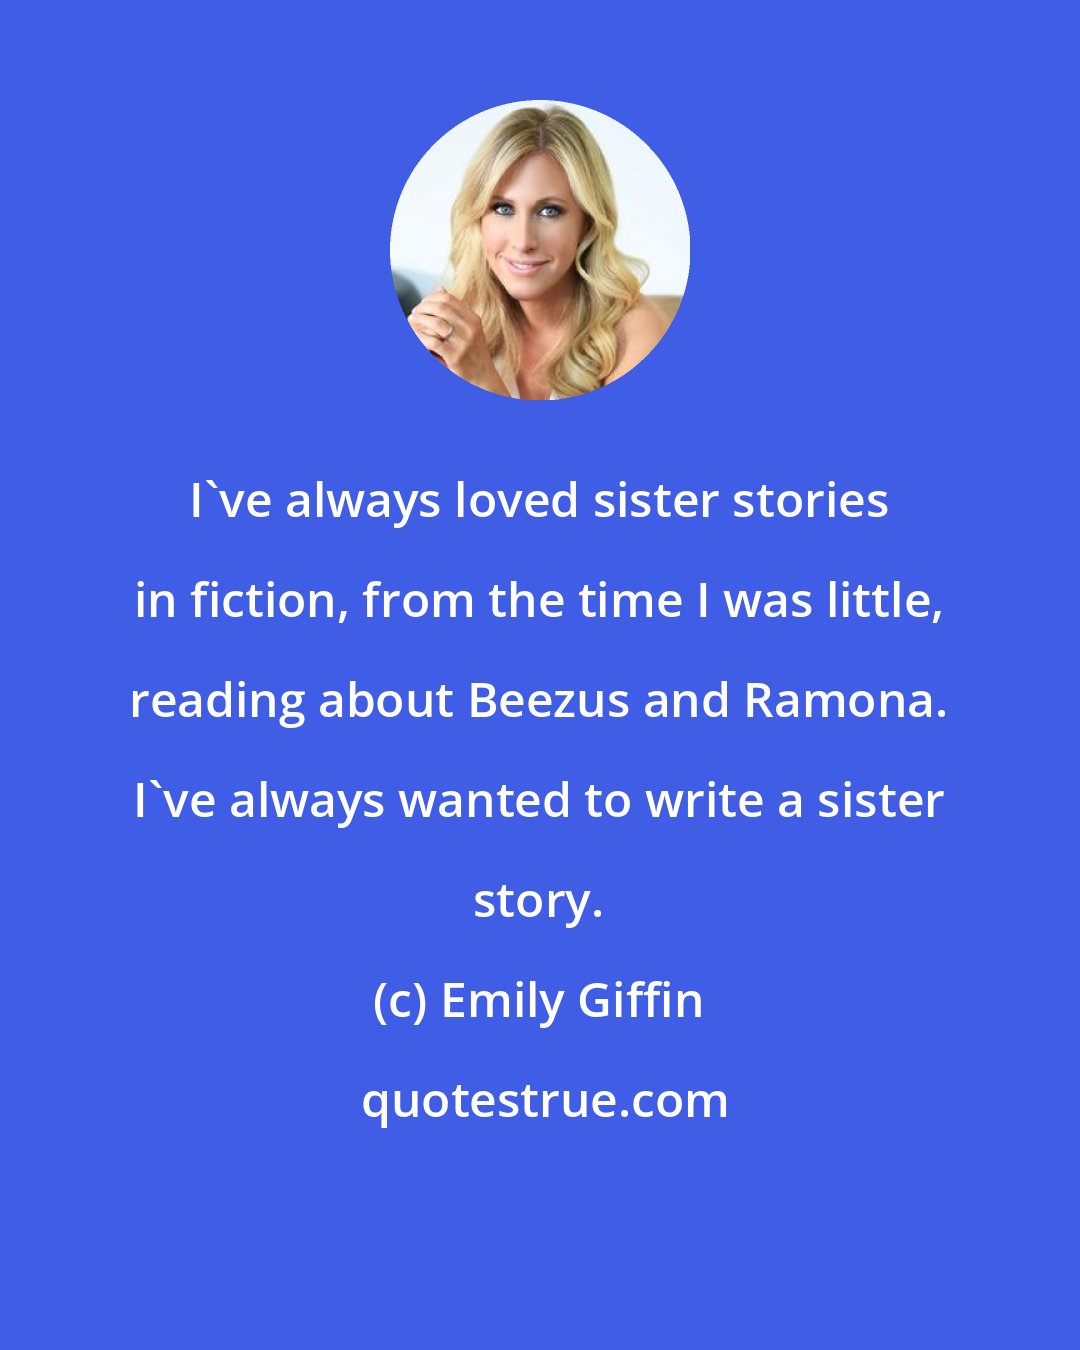 Emily Giffin: I've always loved sister stories in fiction, from the time I was little, reading about Beezus and Ramona. I've always wanted to write a sister story.